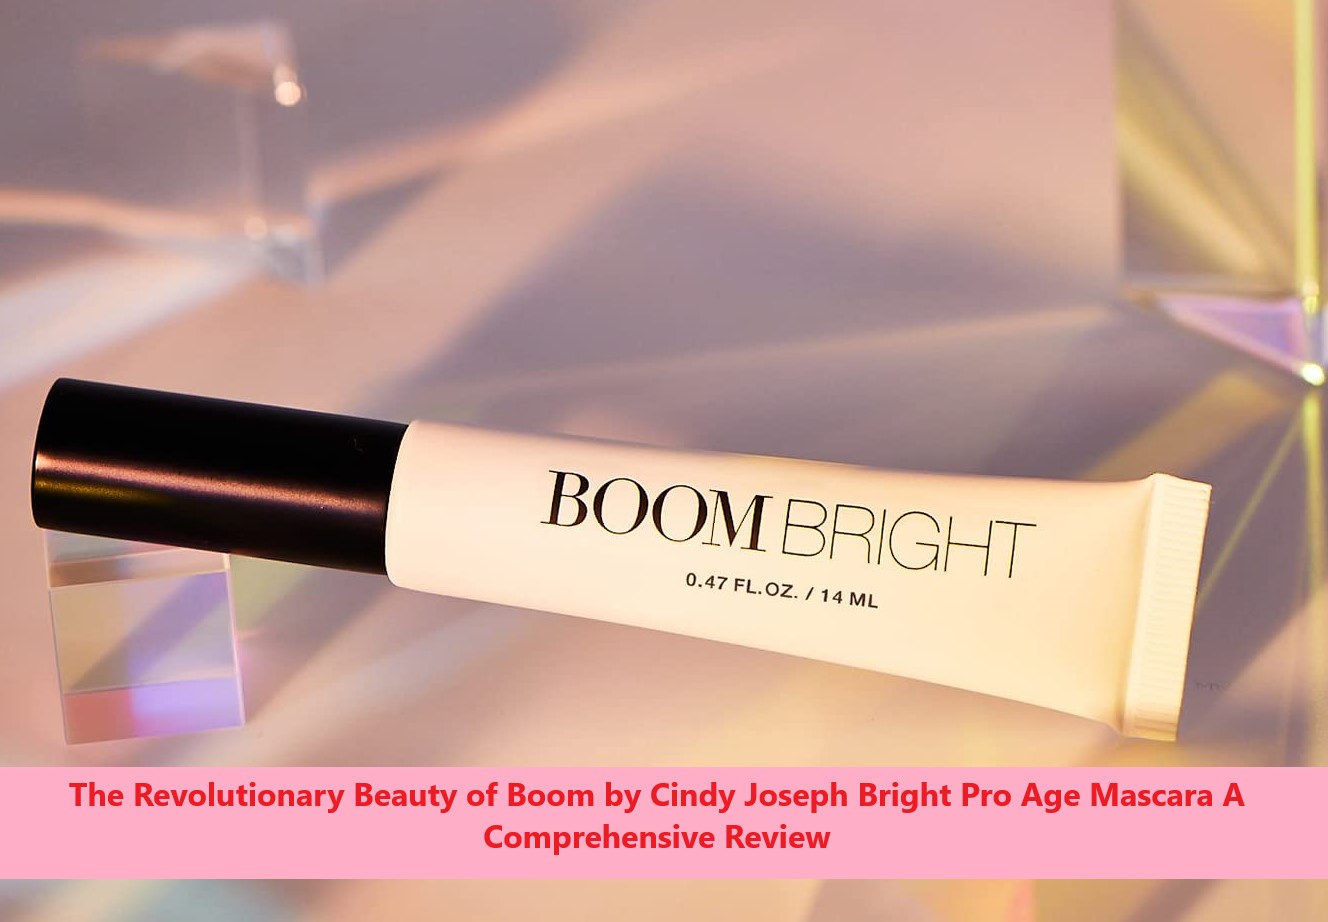 The Revolutionary Beauty of Boom by Cindy Joseph Bright Pro Age Mascara A Comprehensive Review